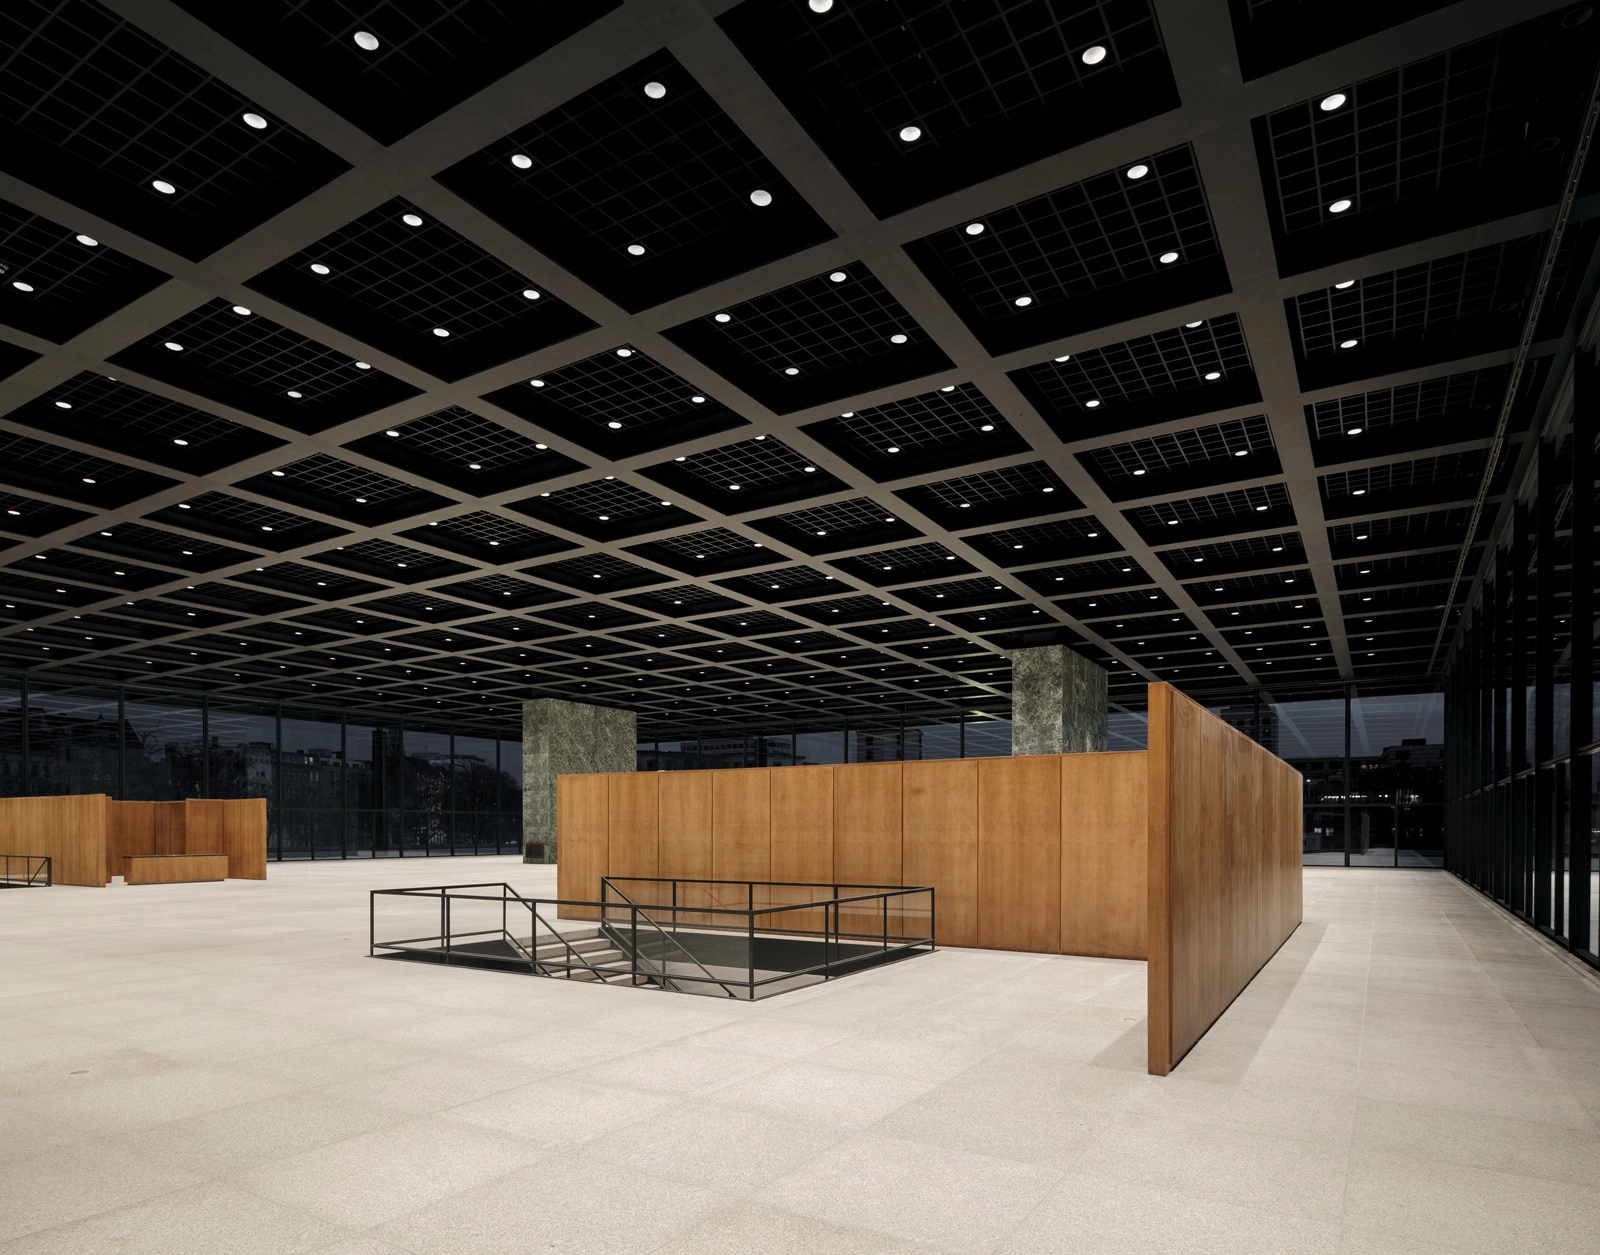 Image of 20210625 Chipperfield NeueNationalgalerieRefurbishment 07.2 in Neue Nationalgalerie Refurbishment - Cosentino